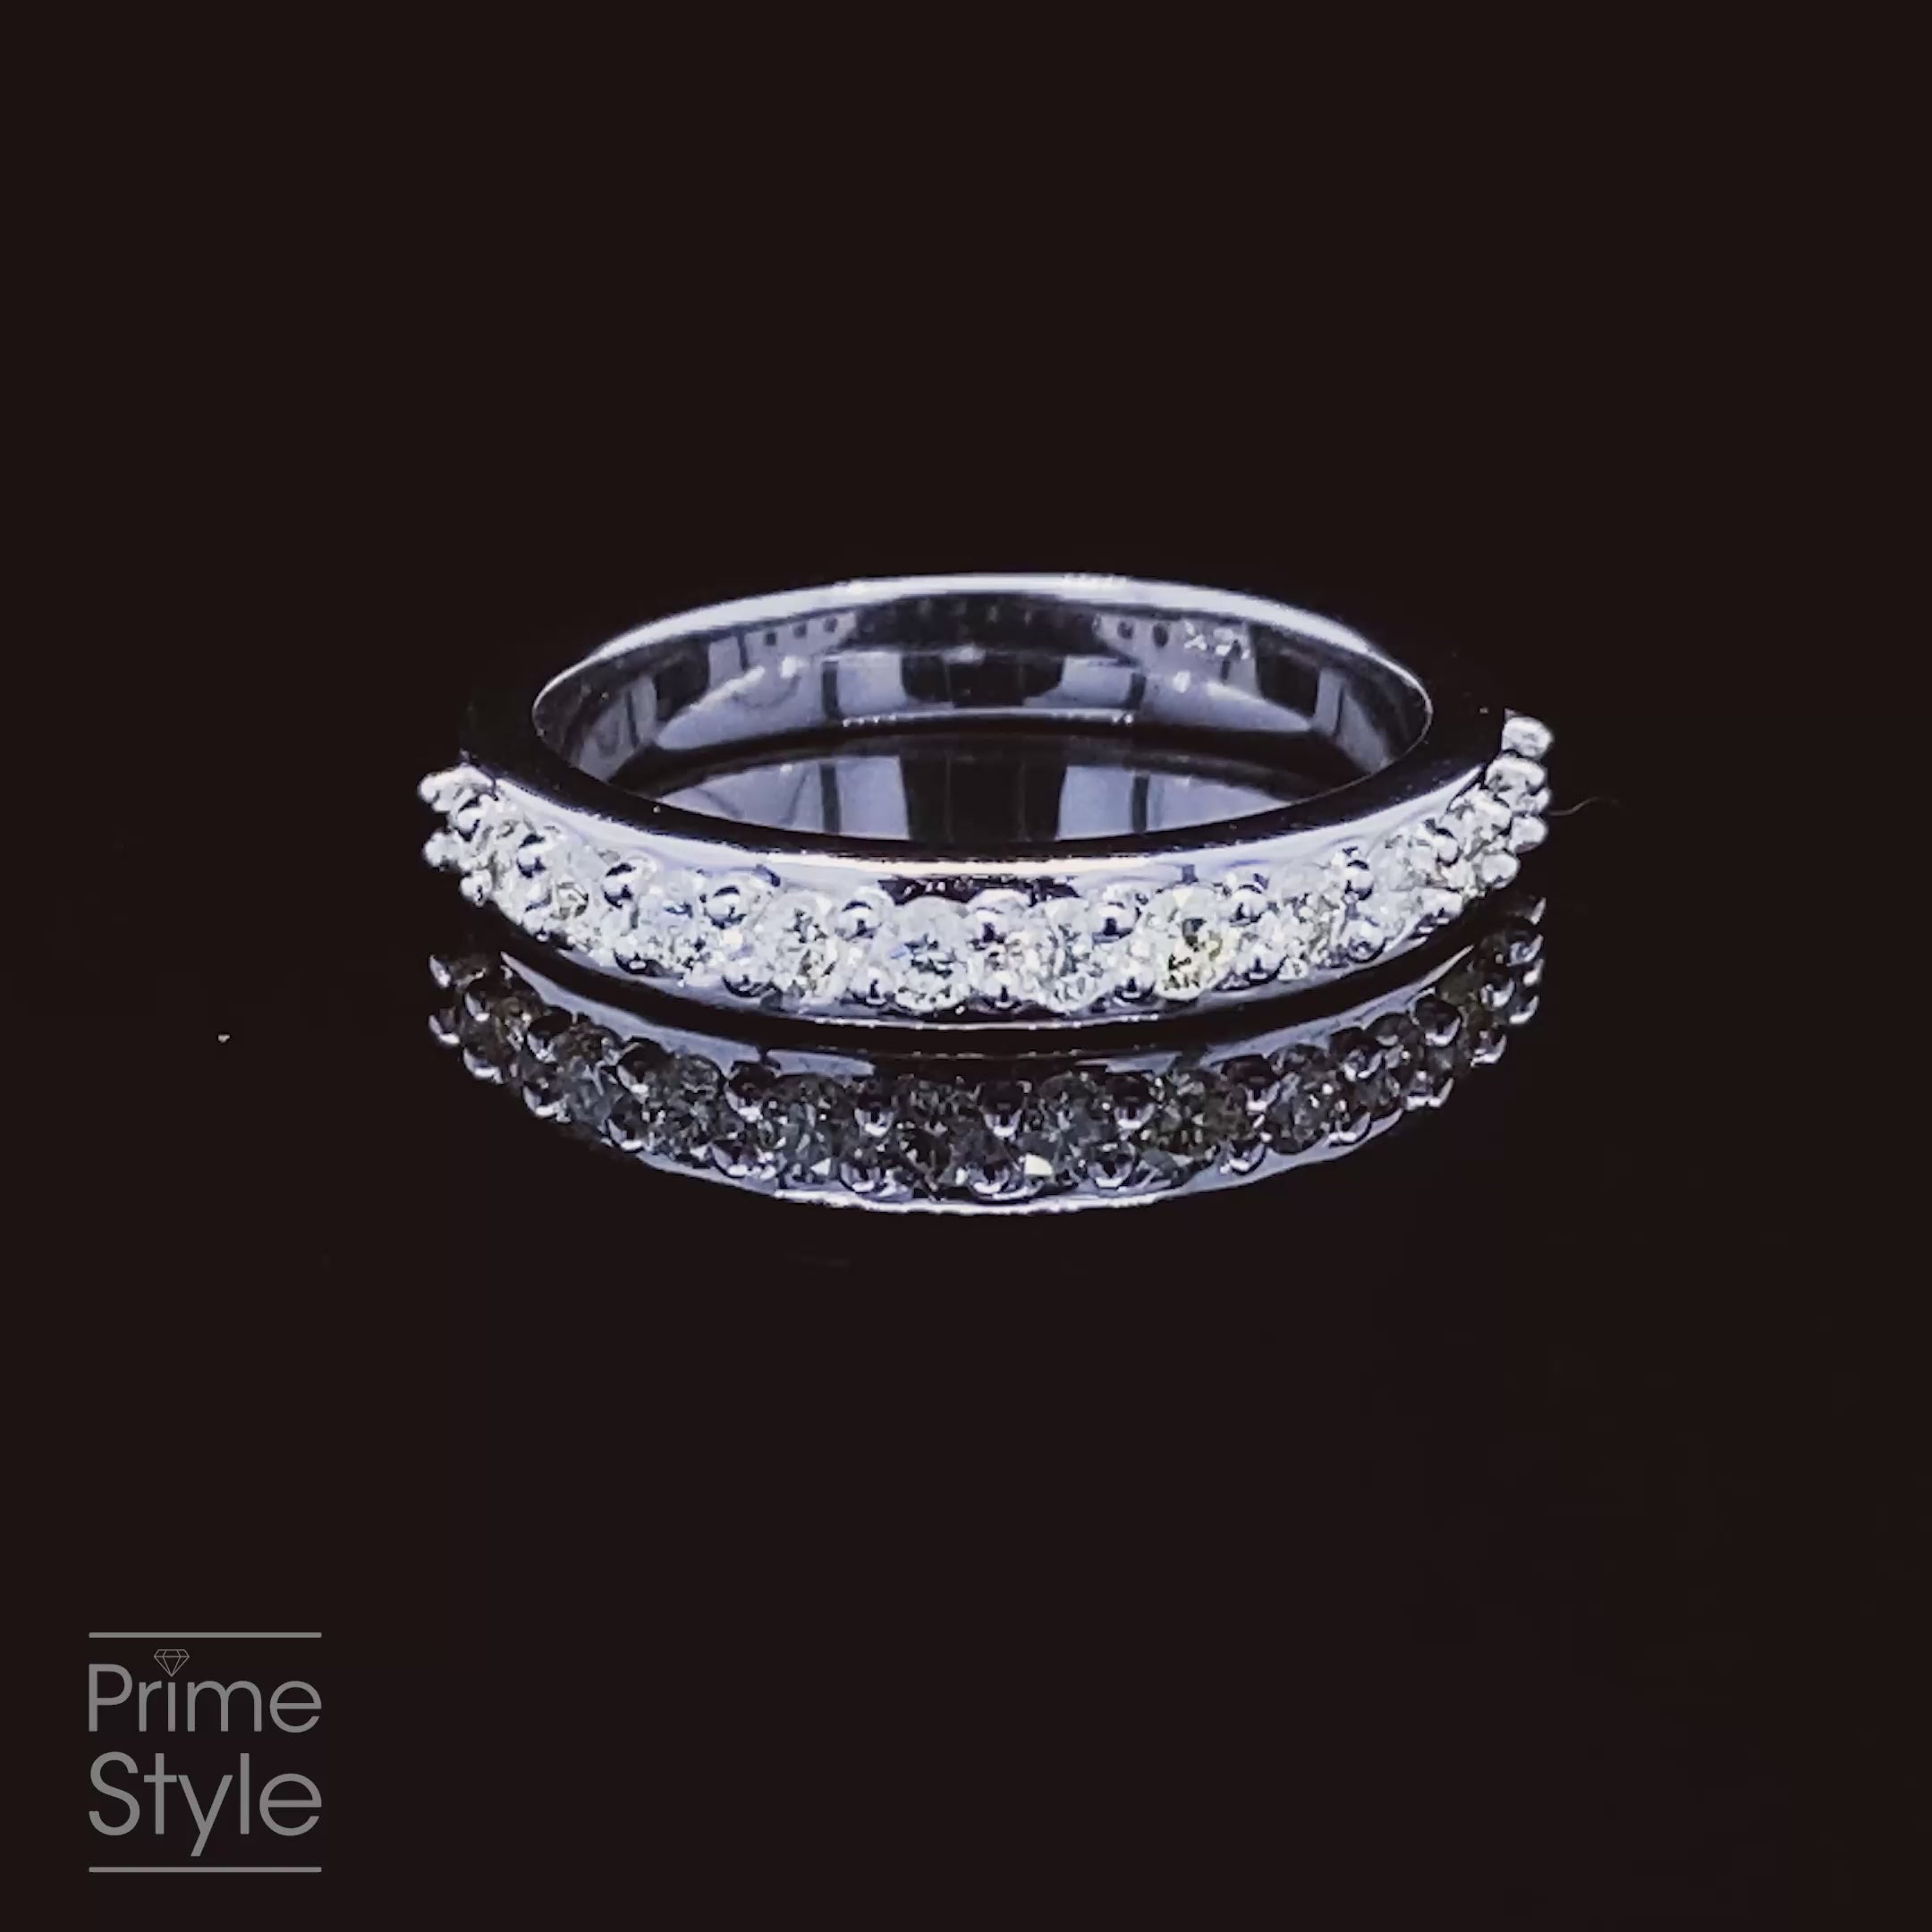 Quality 0.50 CT Diamond Wedding Band in 14 KT White Gold